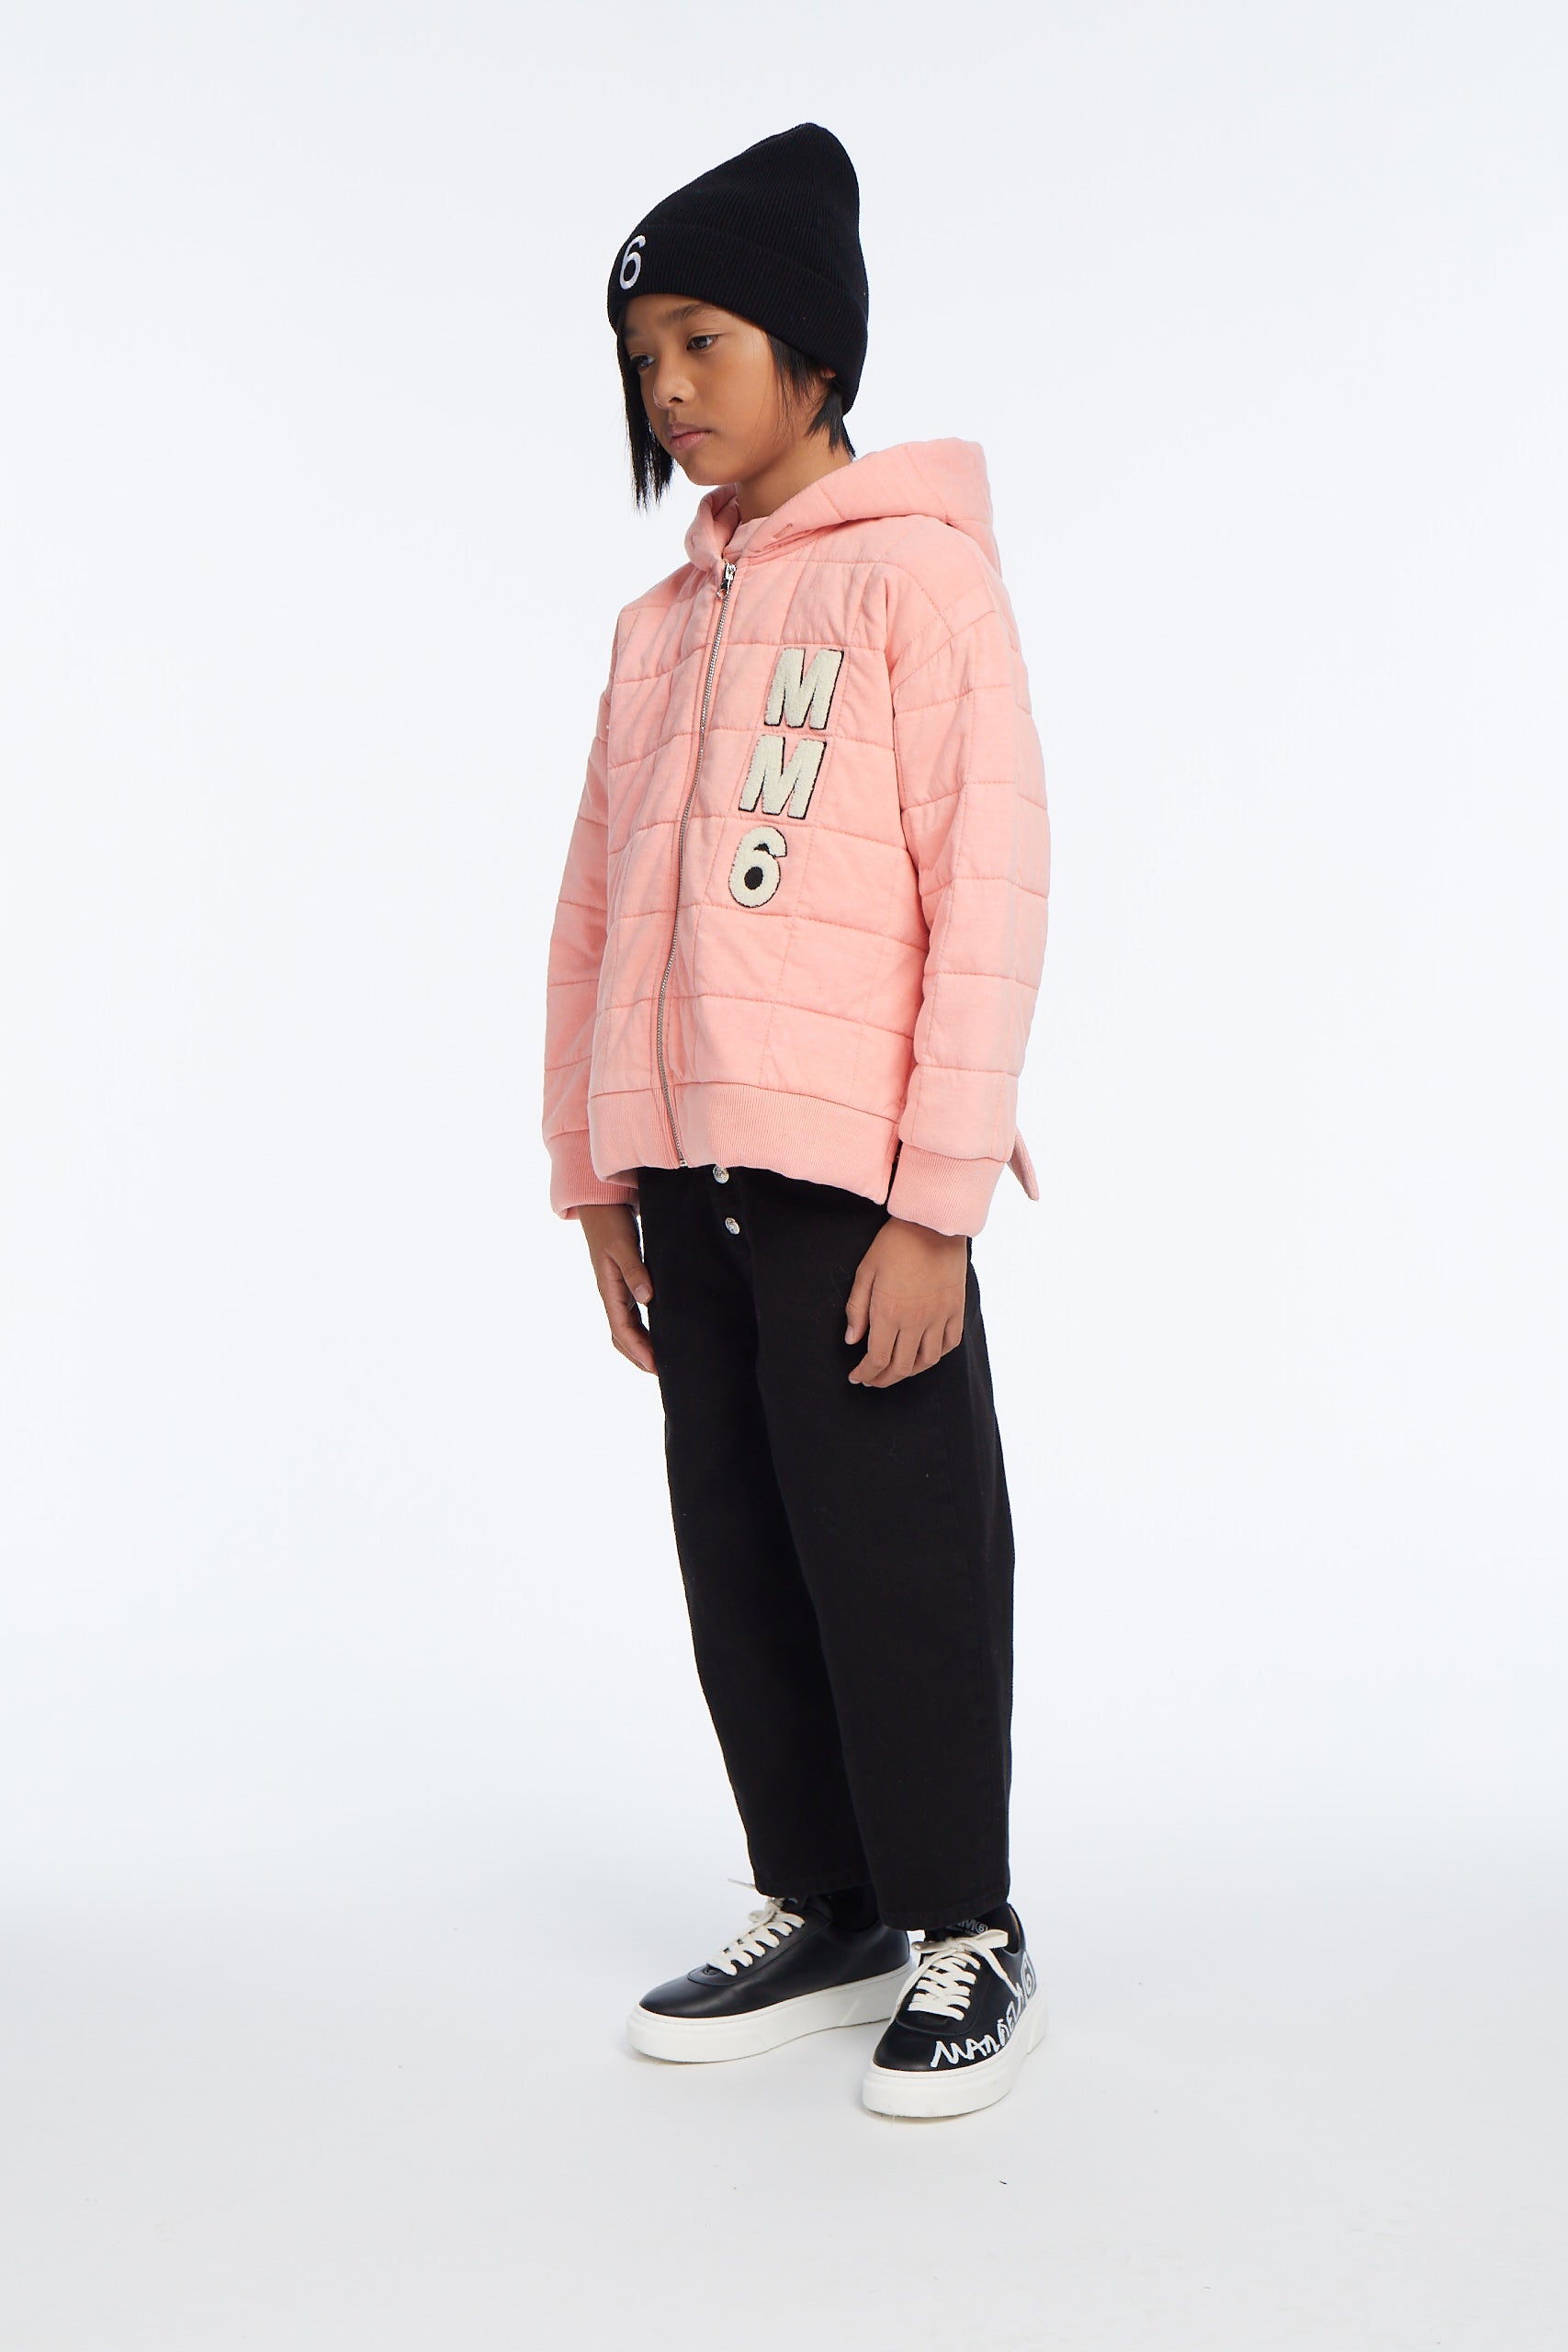 MM6 MAISON MARGIELA QUILTED JERSEY PINK HOODED SWEATSHIRT WITH ZIP